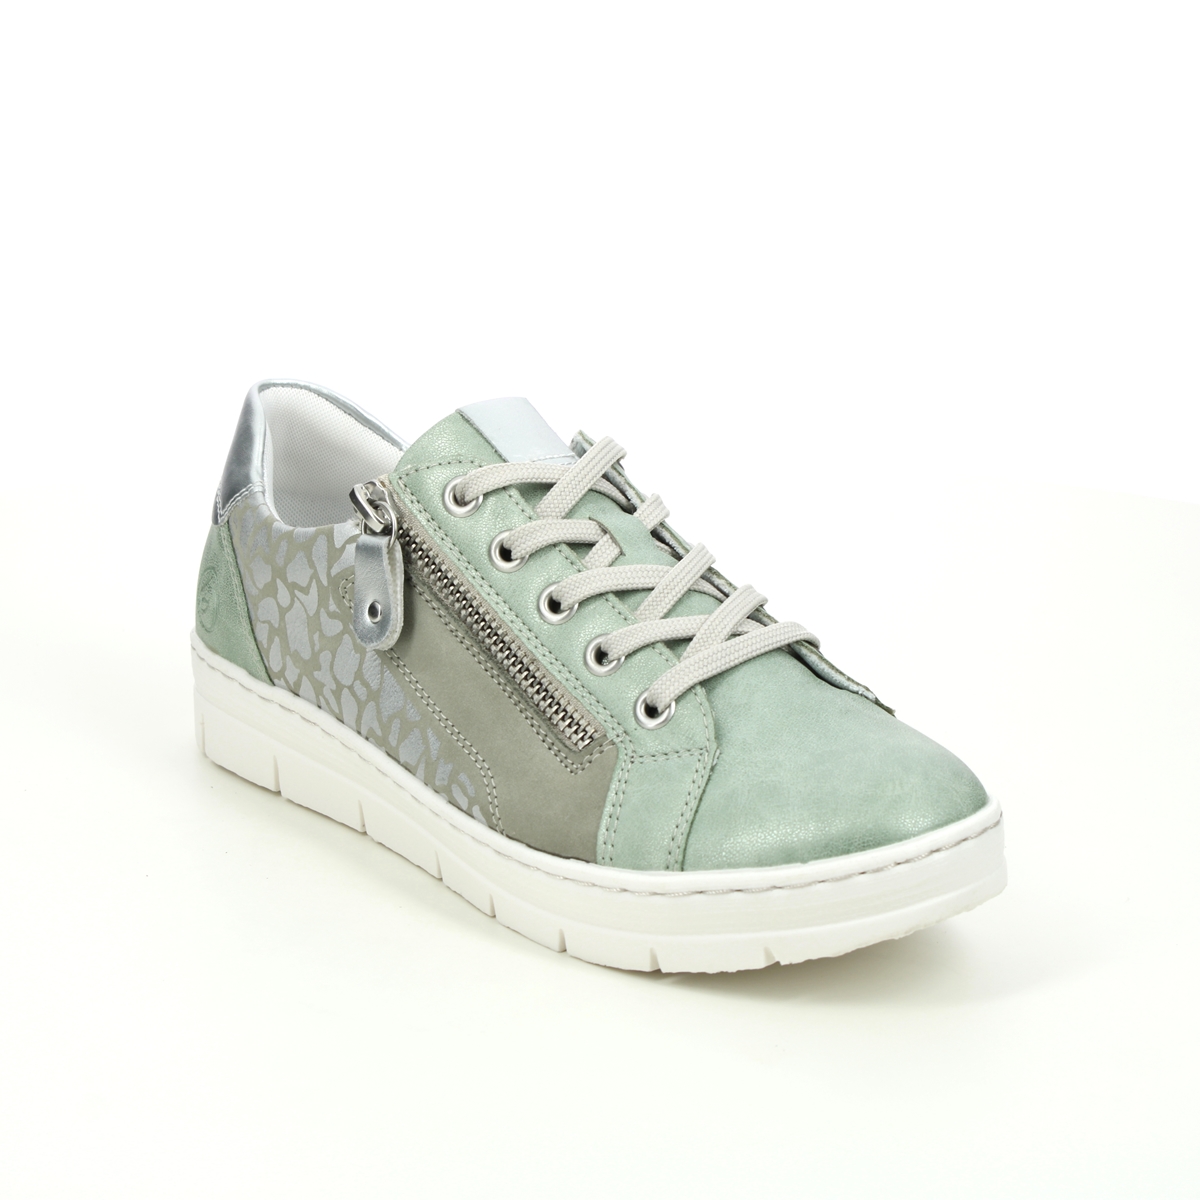 Remonte Ravenna 11 Mint Green Womens Trainers D5821-52 In Size 38 In Plain Mint Green